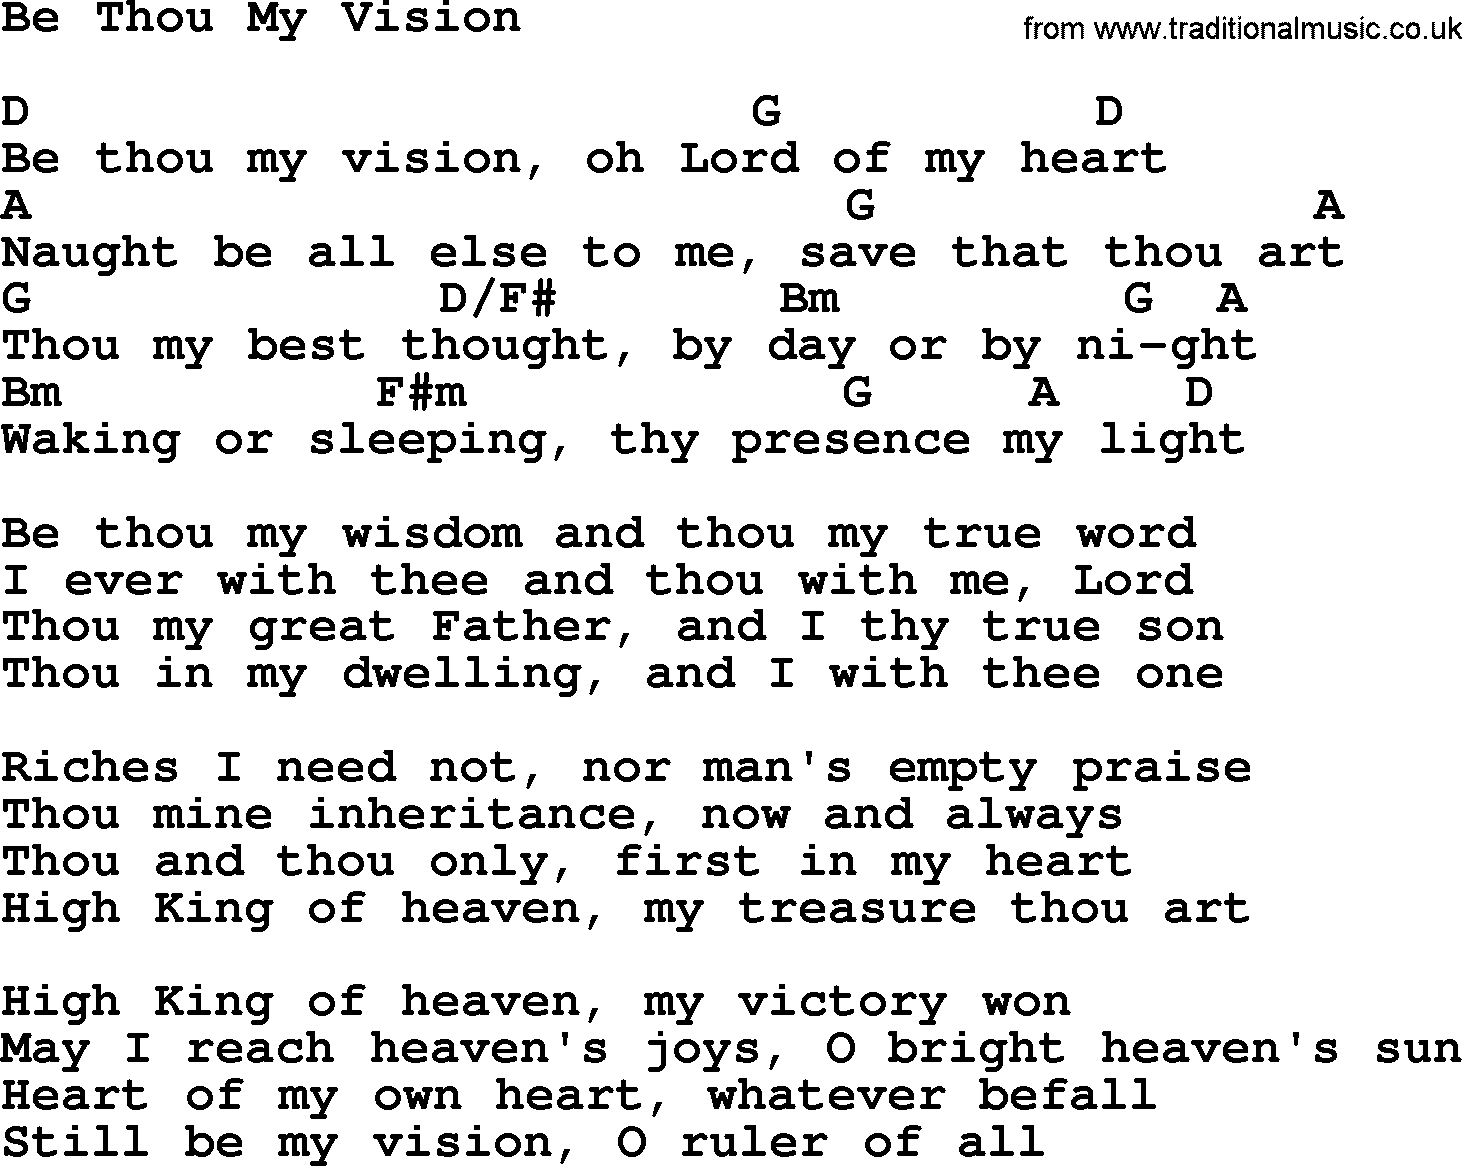 Top 1000 Most Popular Folk and Old-time Songs: Be Thou My Vision, lyrics and chords